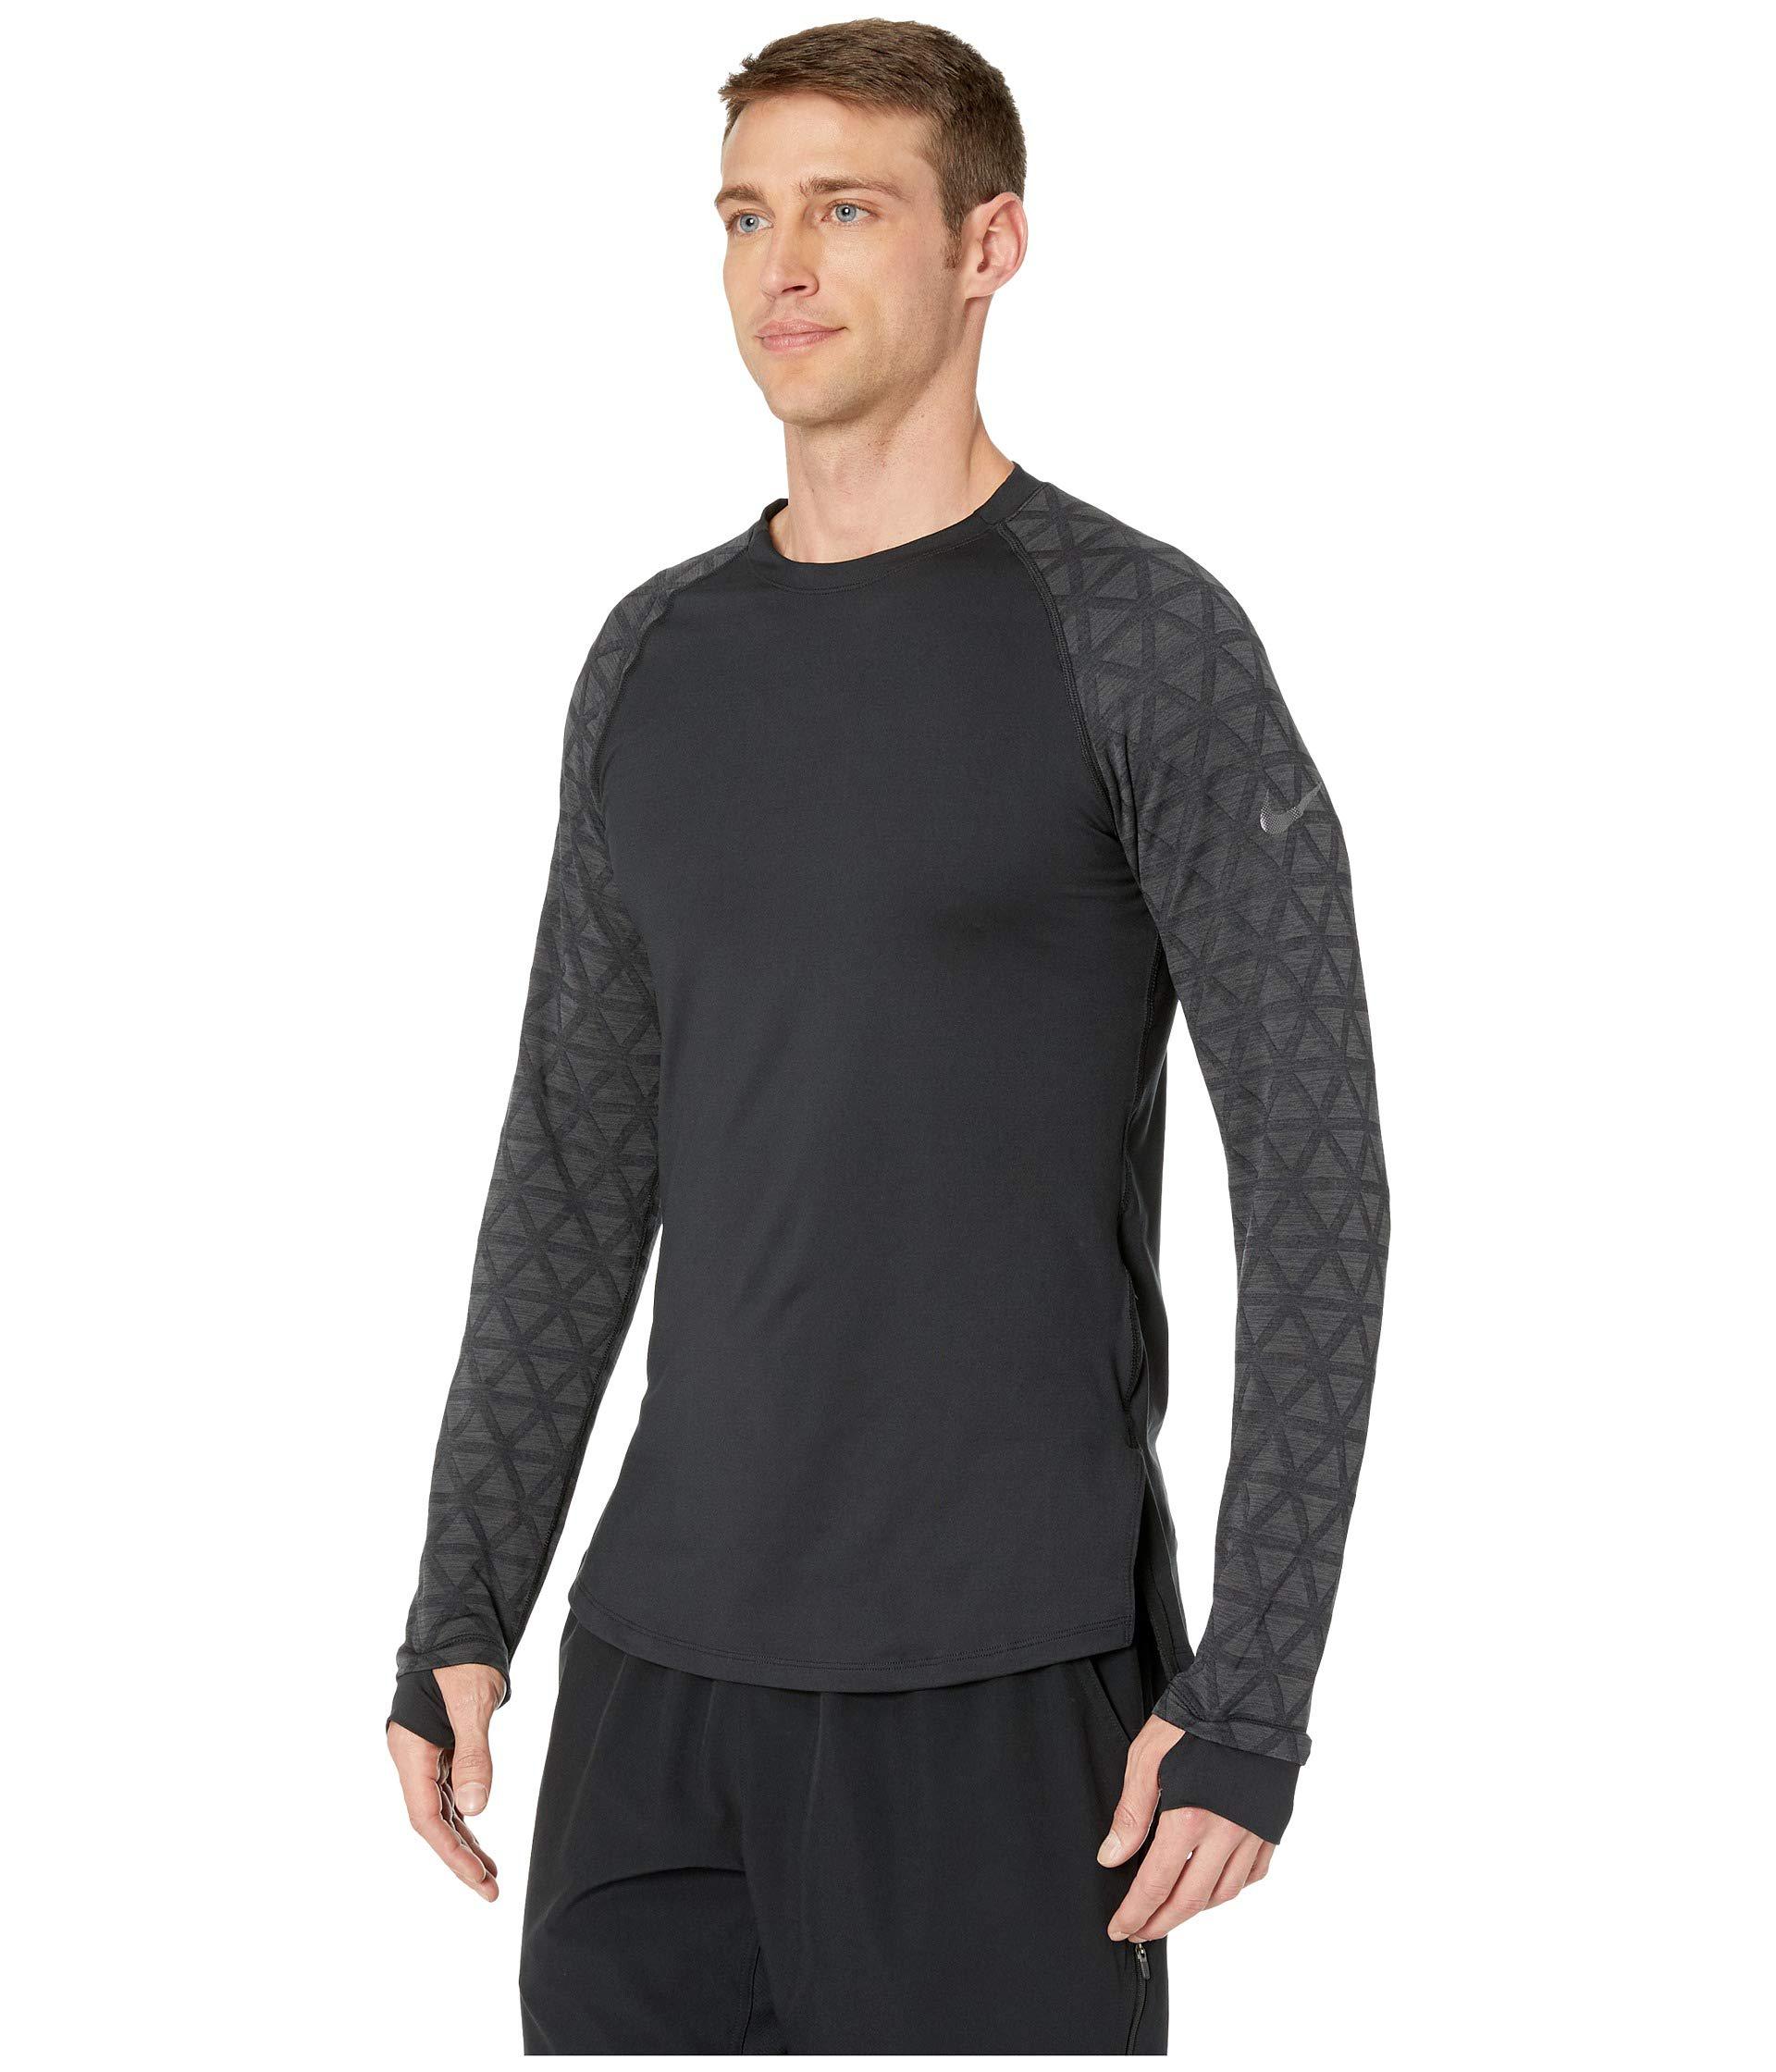 Nike Synthetic Niko Pro Therma Long Sleeve Mock Neck T-shirt in  Black/Anthracite/Dark Grey (Gray) for Men - Lyst